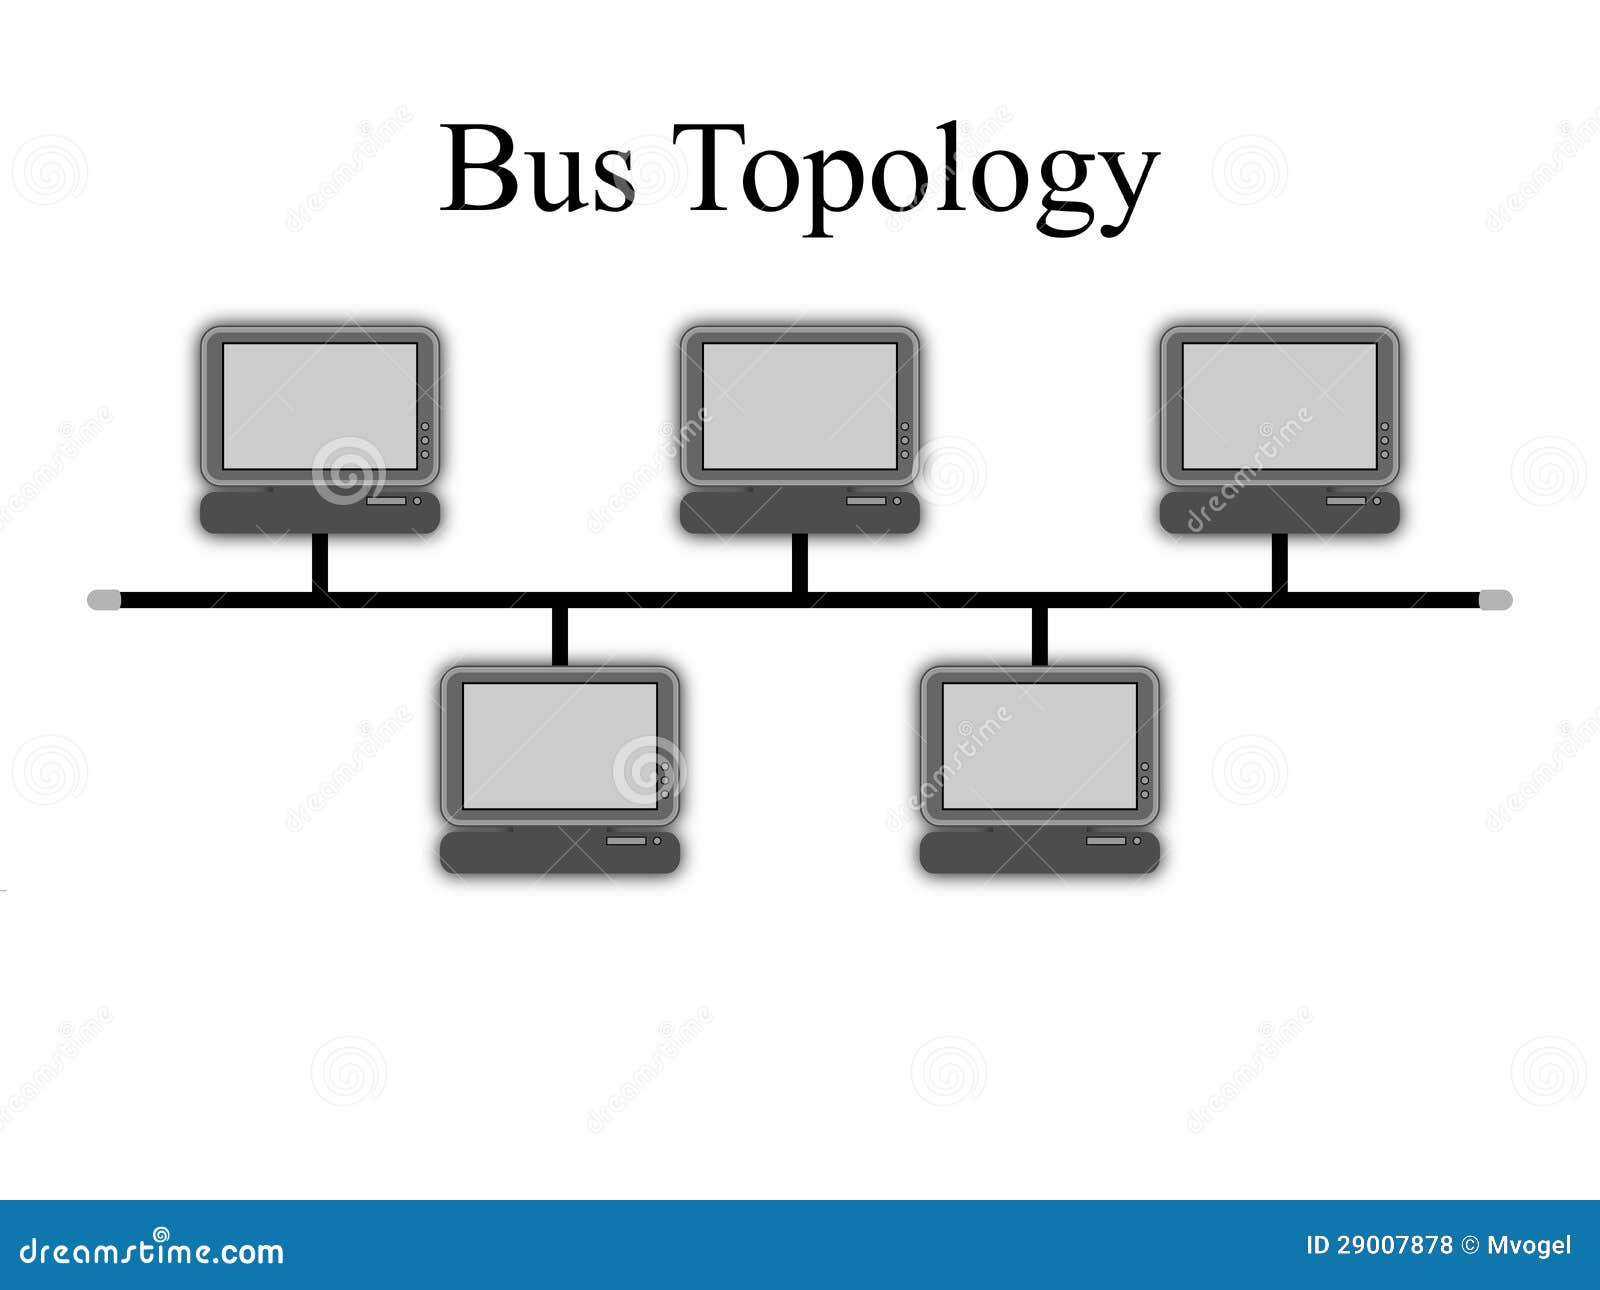 Architecture And Topology